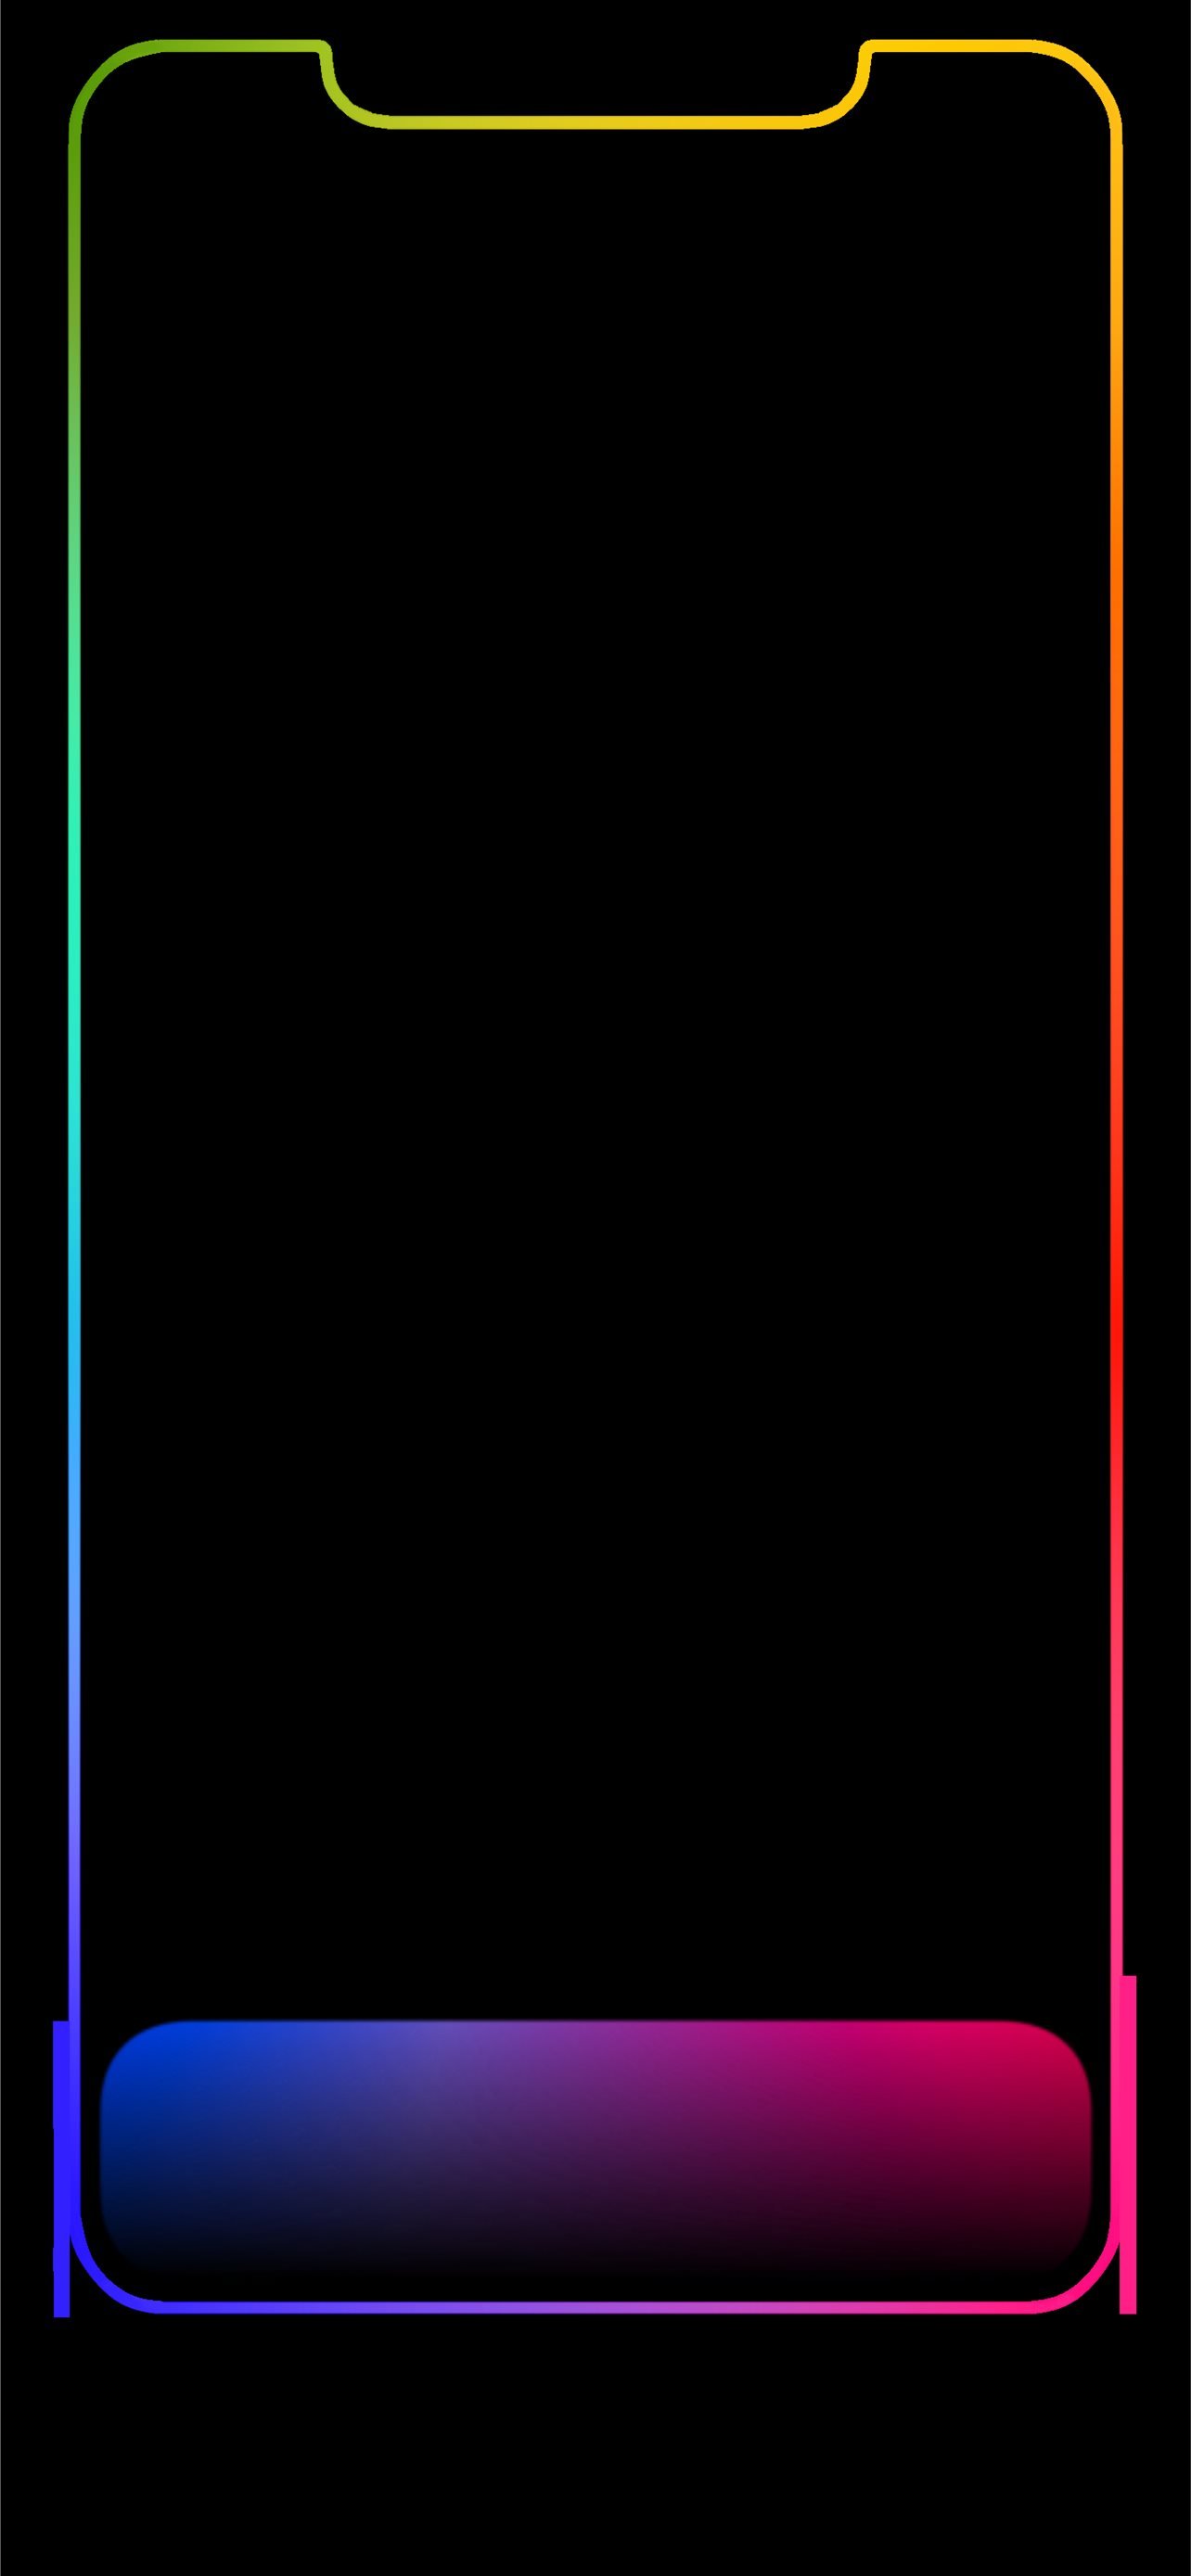 Max Outline iPhone Wallpaper Free Download